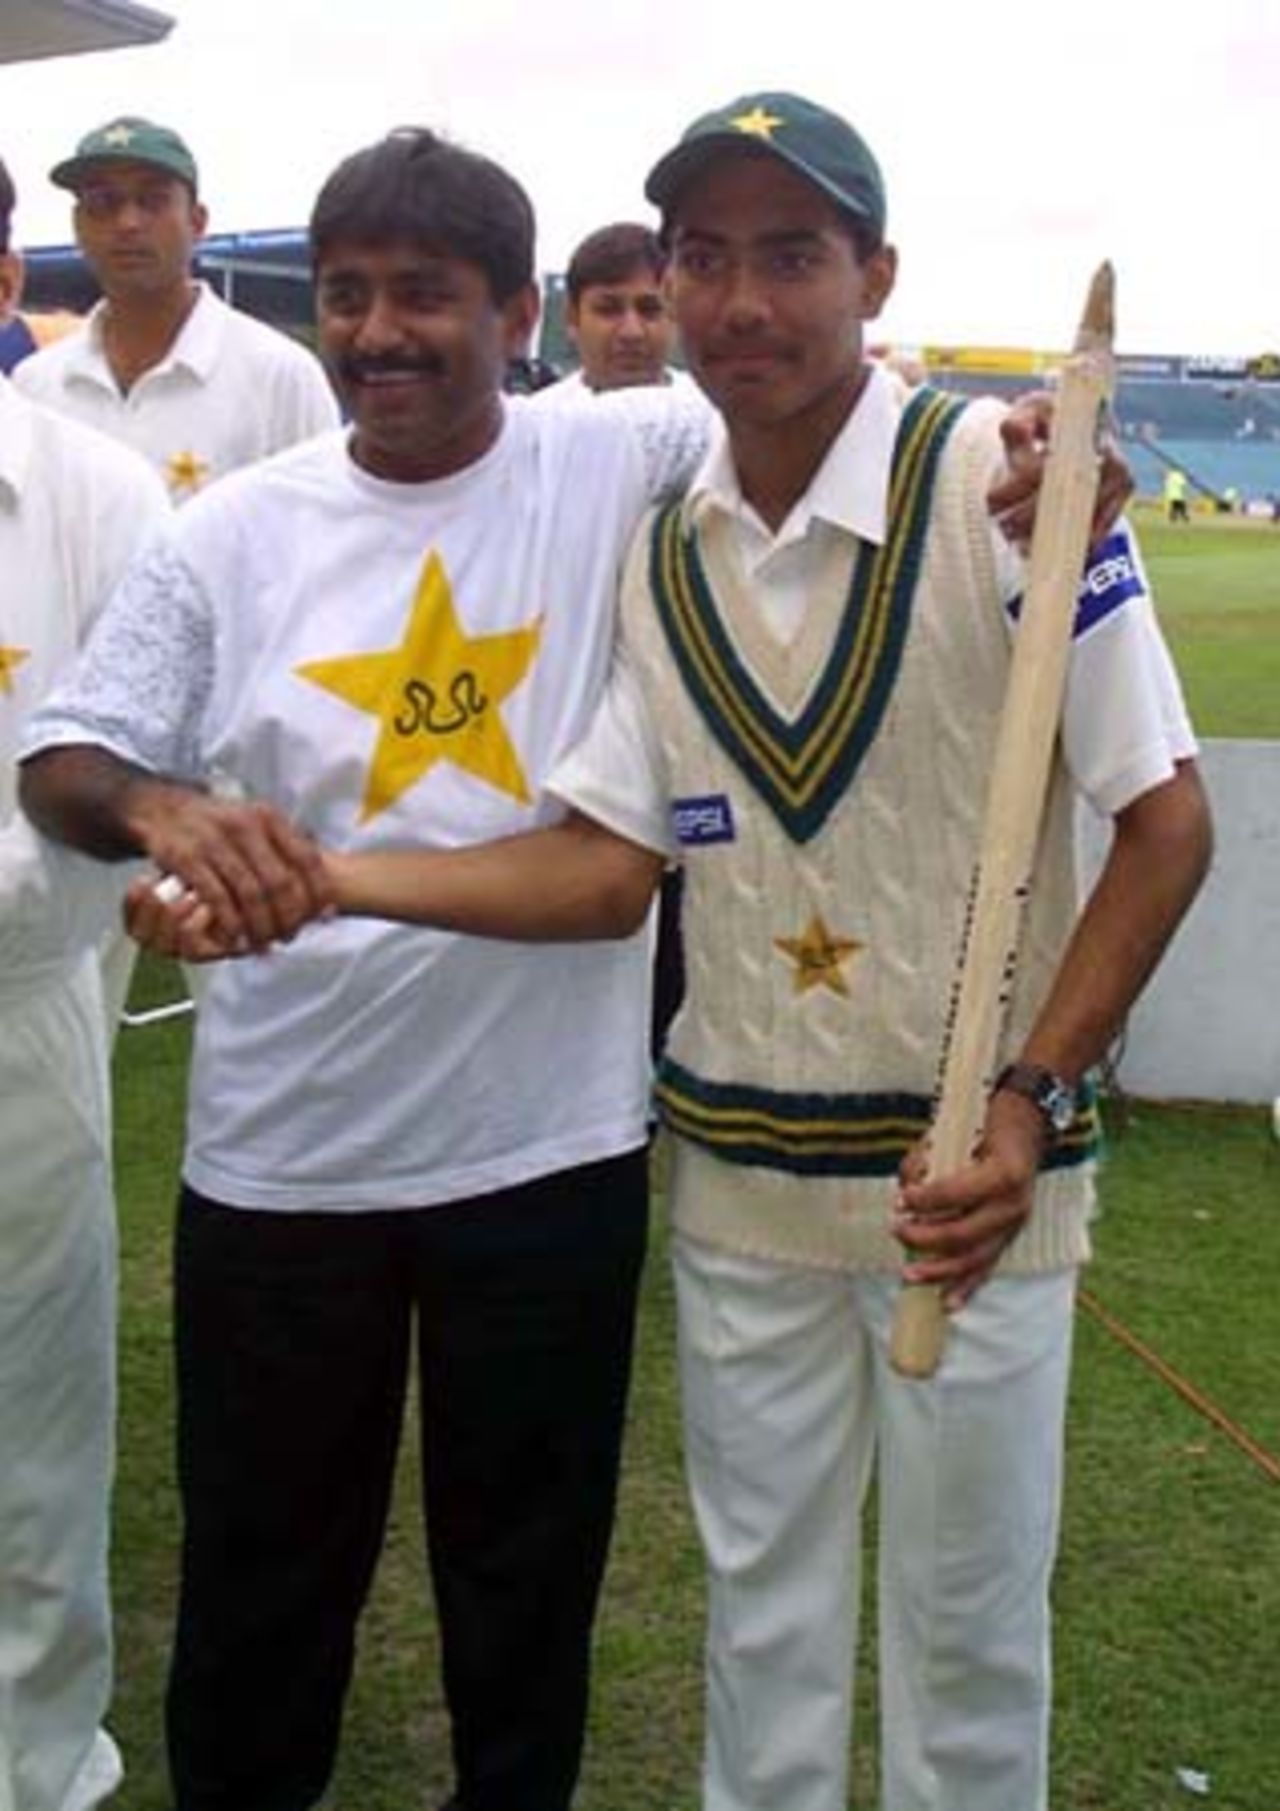 Debutant Pakistan fast bowler Mohammad Sami (right) is congratulated by coach Javed Miandad after taking 5-36 from 15 overs in New Zealand's second innings to help complete a 299-run victory. Sami took 8-106 from 46.4 overs in the match to earn the Man of the Match award. 1st Test: New Zealand v Pakistan at Eden Park, Auckland, 8-12 March 2001 (12 March 2001).